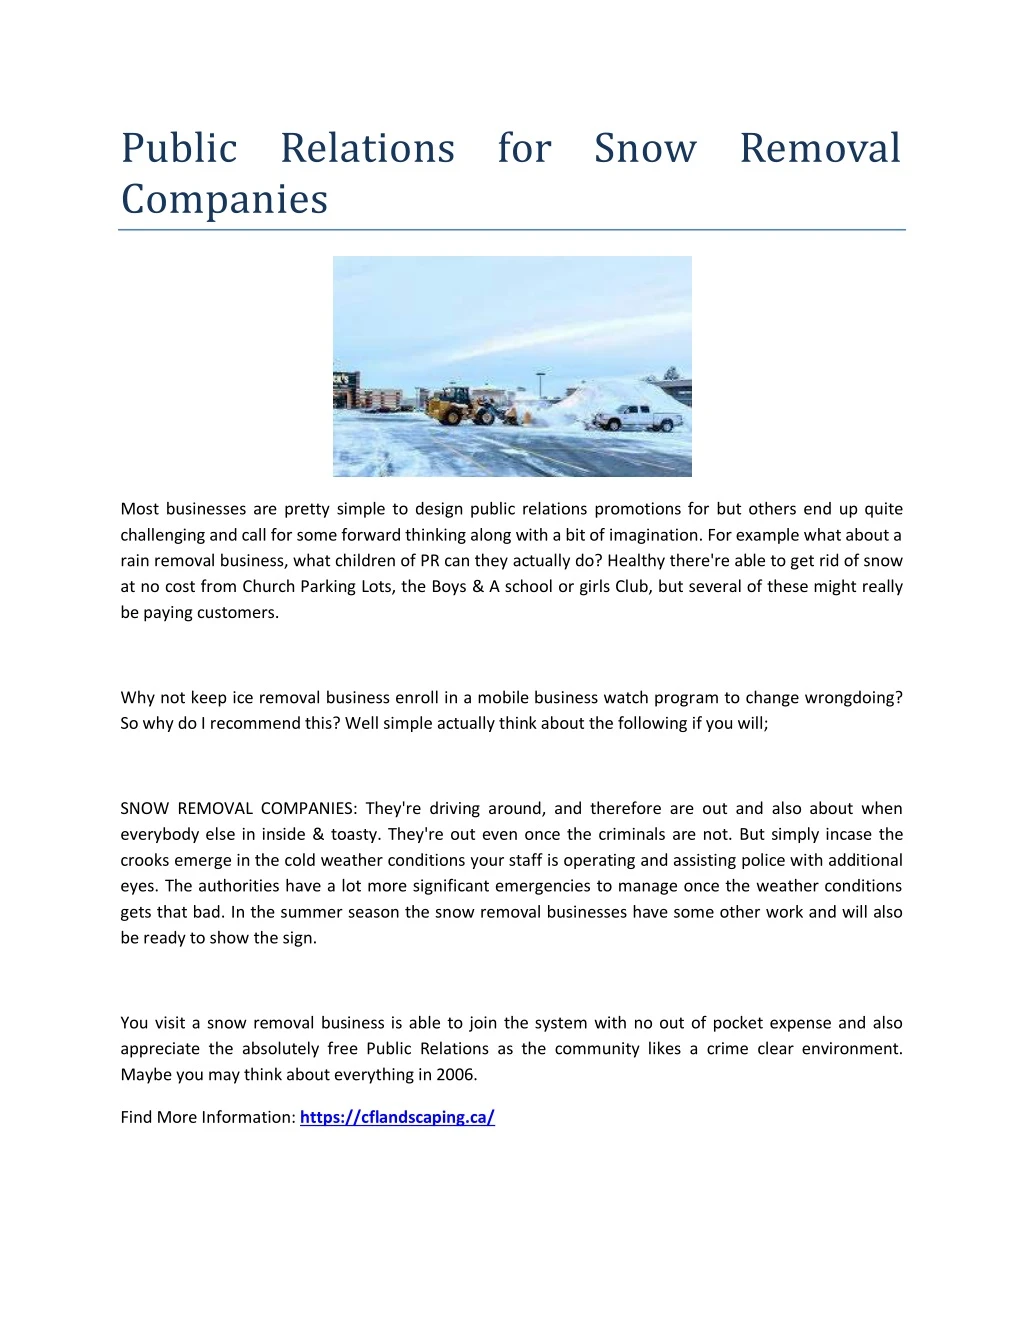 public relations for snow removal companies